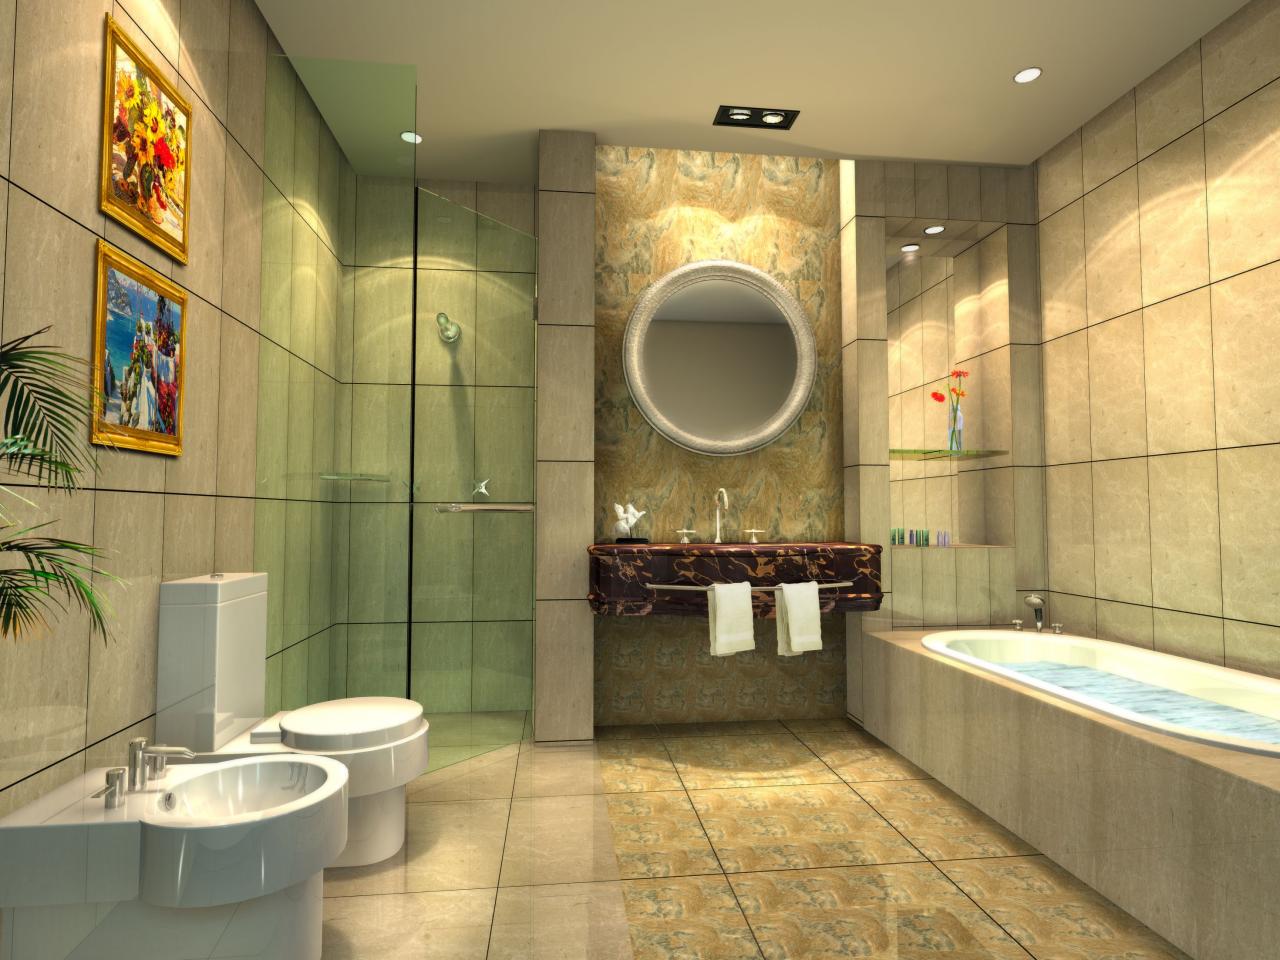 Do You Need Permits For Your Dream Bathroom Remodel?